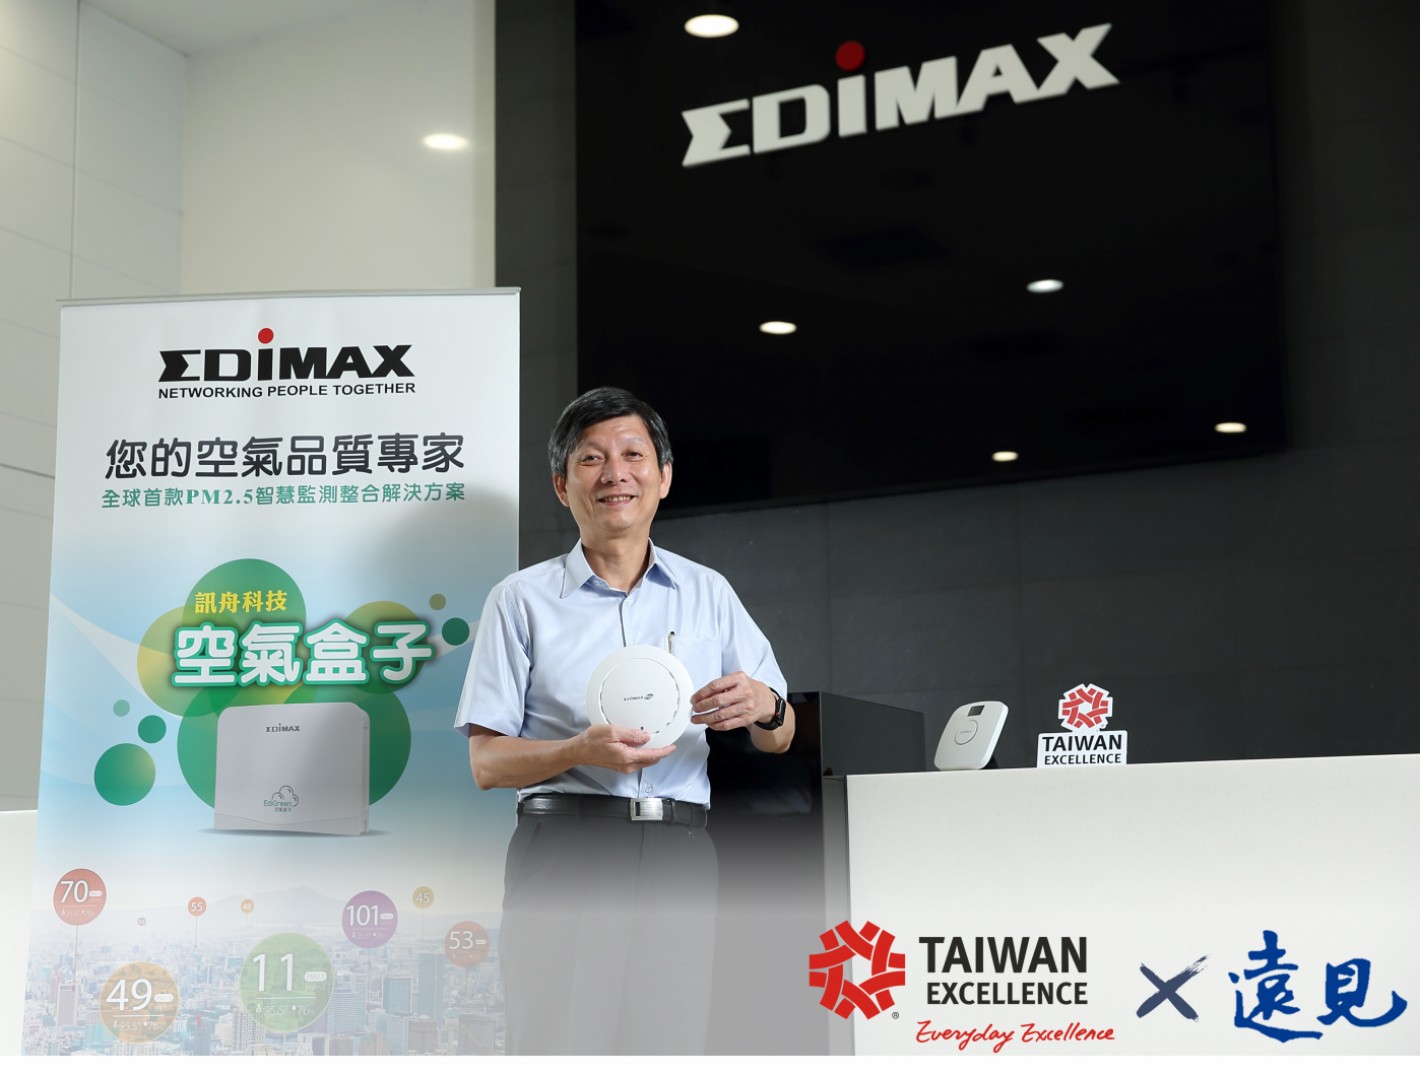 Since 2000, around 43 of Edimax Technology’s products have received the Taiwan Excellence Award. Senior Vice President, Liang-Jung Pan, is confident in the company’s products.